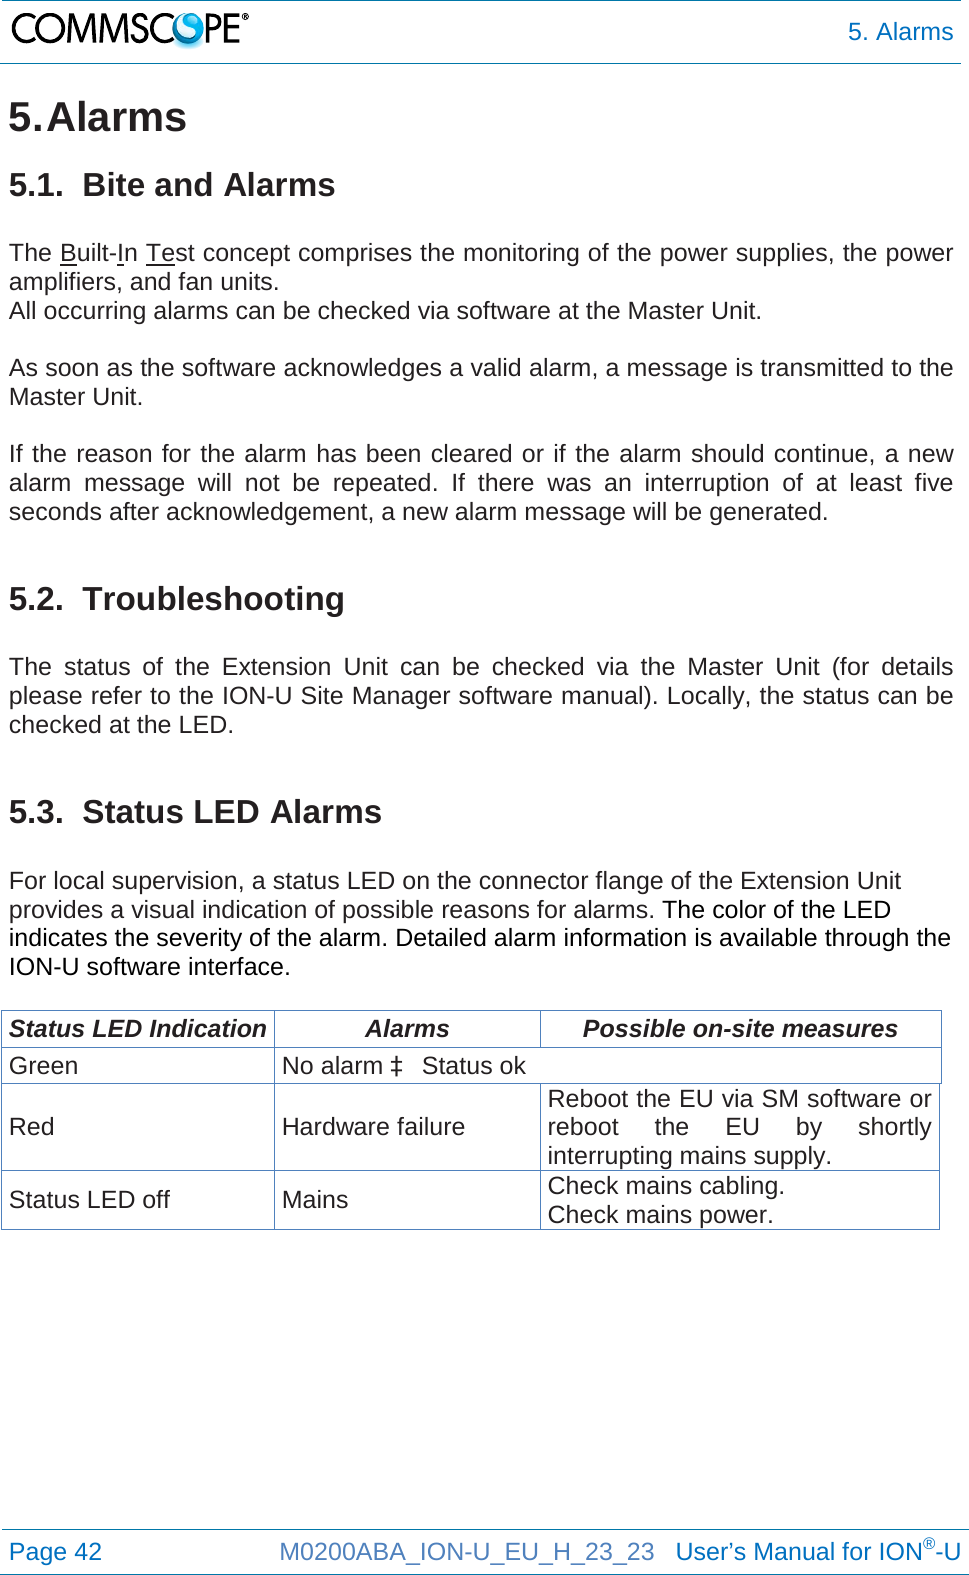  5. Alarms  Page 42 M0200ABA_ION-U_EU_H_23_23   User’s Manual for ION®-U  5. Alarms 5.1.  Bite and Alarms  The Built-In Test concept comprises the monitoring of the power supplies, the power amplifiers, and fan units. All occurring alarms can be checked via software at the Master Unit.  As soon as the software acknowledges a valid alarm, a message is transmitted to the Master Unit.  If the reason for the alarm has been cleared or if the alarm should continue, a new alarm message will not be repeated. If there was an interruption of at least five seconds after acknowledgement, a new alarm message will be generated.  5.2.  Troubleshooting  The status of the Extension Unit can be checked via the Master Unit (for details please refer to the ION-U Site Manager software manual). Locally, the status can be checked at the LED.  5.3.  Status LED Alarms  For local supervision, a status LED on the connector flange of the Extension Unit provides a visual indication of possible reasons for alarms. The color of the LED indicates the severity of the alarm. Detailed alarm information is available through the ION-U software interface.  Status LED Indication Alarms Possible on-site measures Green No alarm à Status ok Red Hardware failure Reboot the EU via SM software or reboot the EU by shortly interrupting mains supply. Status LED off Mains Check mains cabling. Check mains power.    